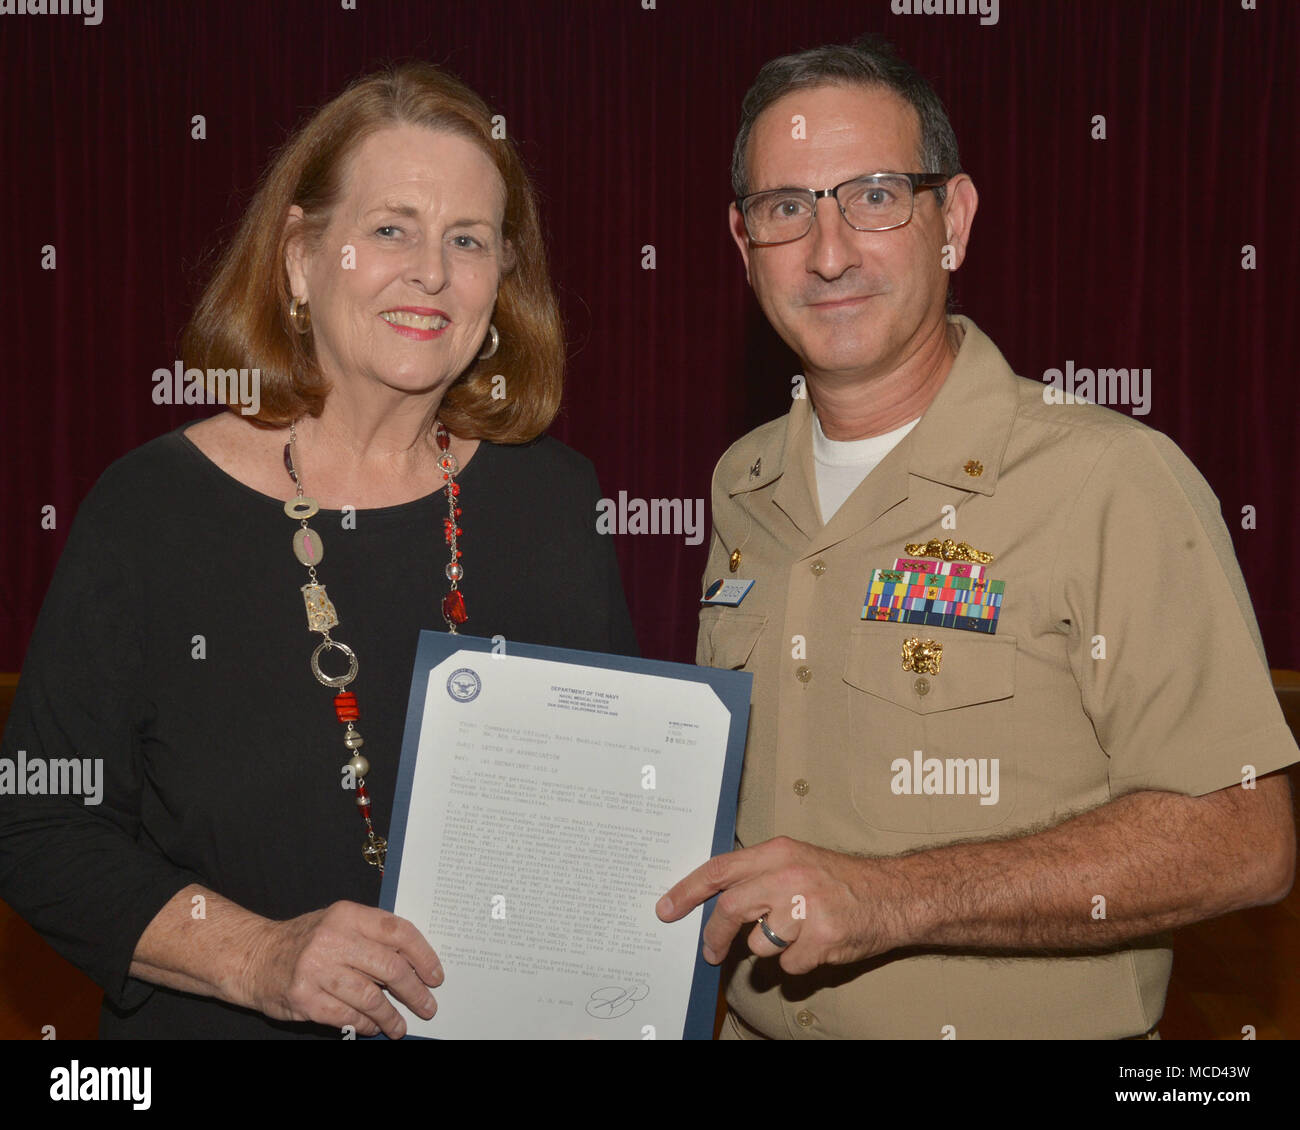 180214-N-PN275-1001 SAN DIEGO (Feb. 01, 2018) CAPT. Joel Roos, Naval Medical Center San Diego Commanding Officer, Presents Ann Glassmoyer, a Licensed Clinical Social Worker at University of San Diego with a Letter of appreciation for supporting the NMCSD wellness committee. The NMCSD Wellness Providers are an integral piece of patient safety commitment at the hospital. (U.S. Navy Photo by Mass Communication Specialist 2nd Class Zachary Kreitzer) Stock Photo